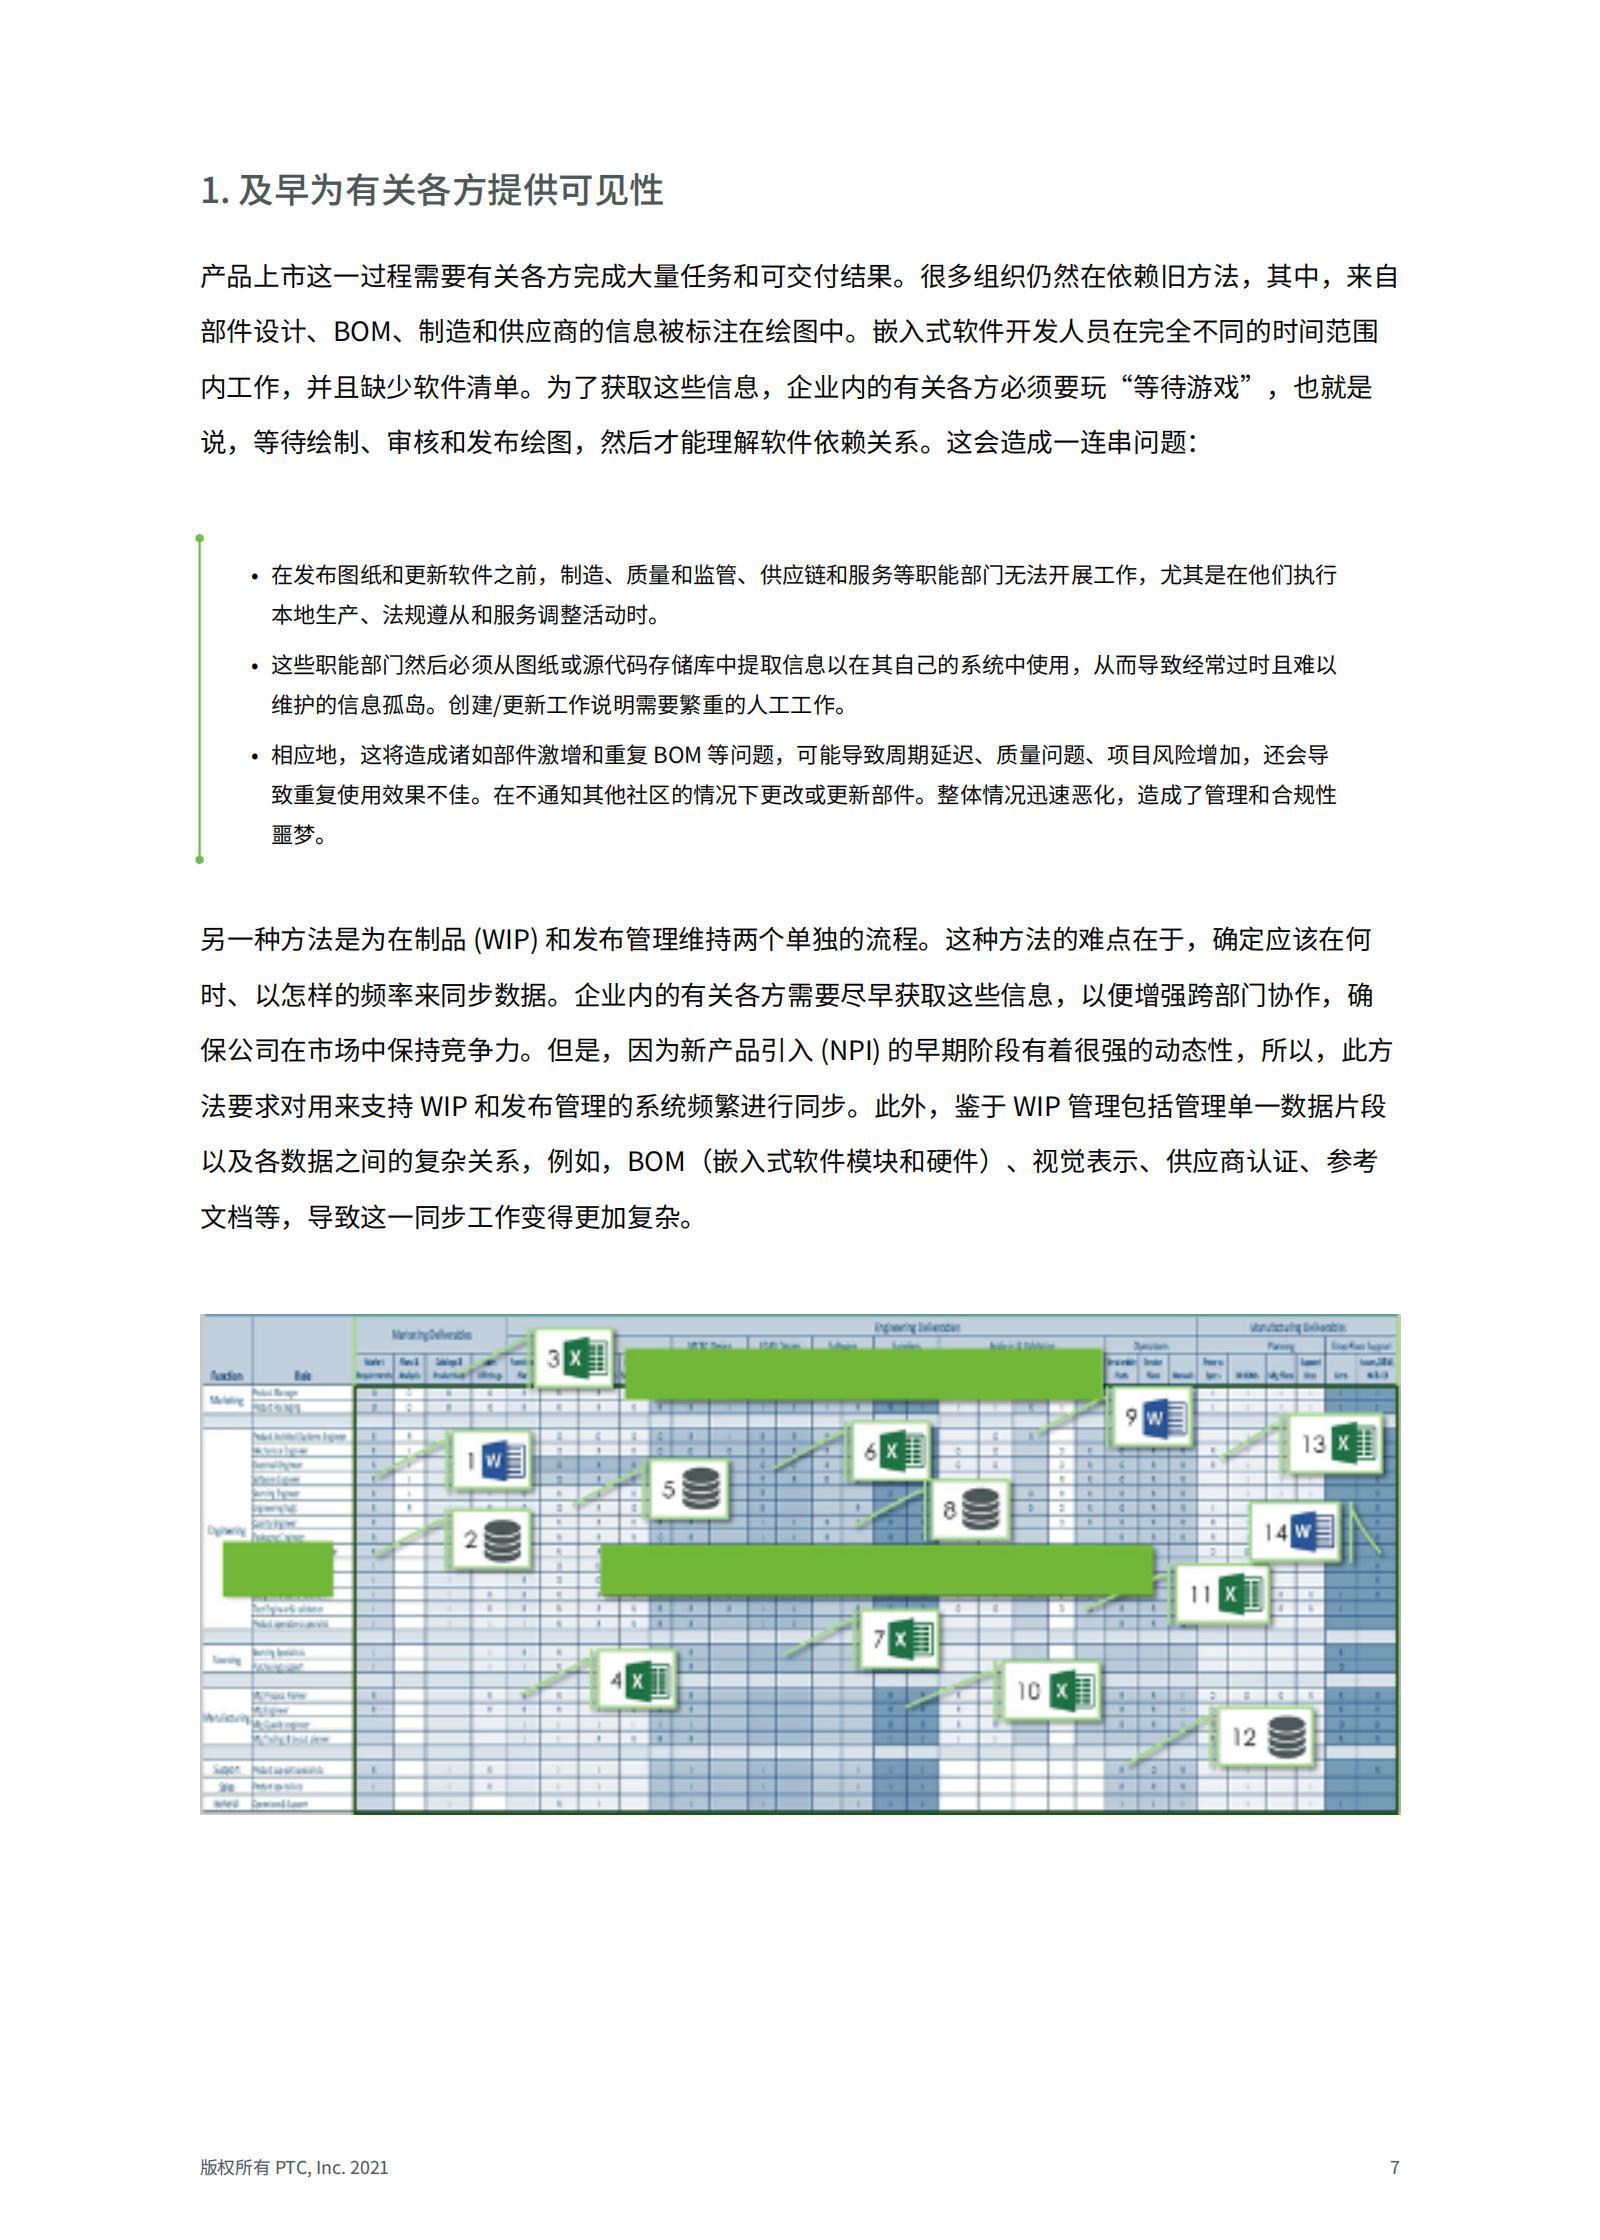 Whitepaper_ Establish a BOM Centric Approach_ Ten Ways to Organize Your Data (Chinese)_06